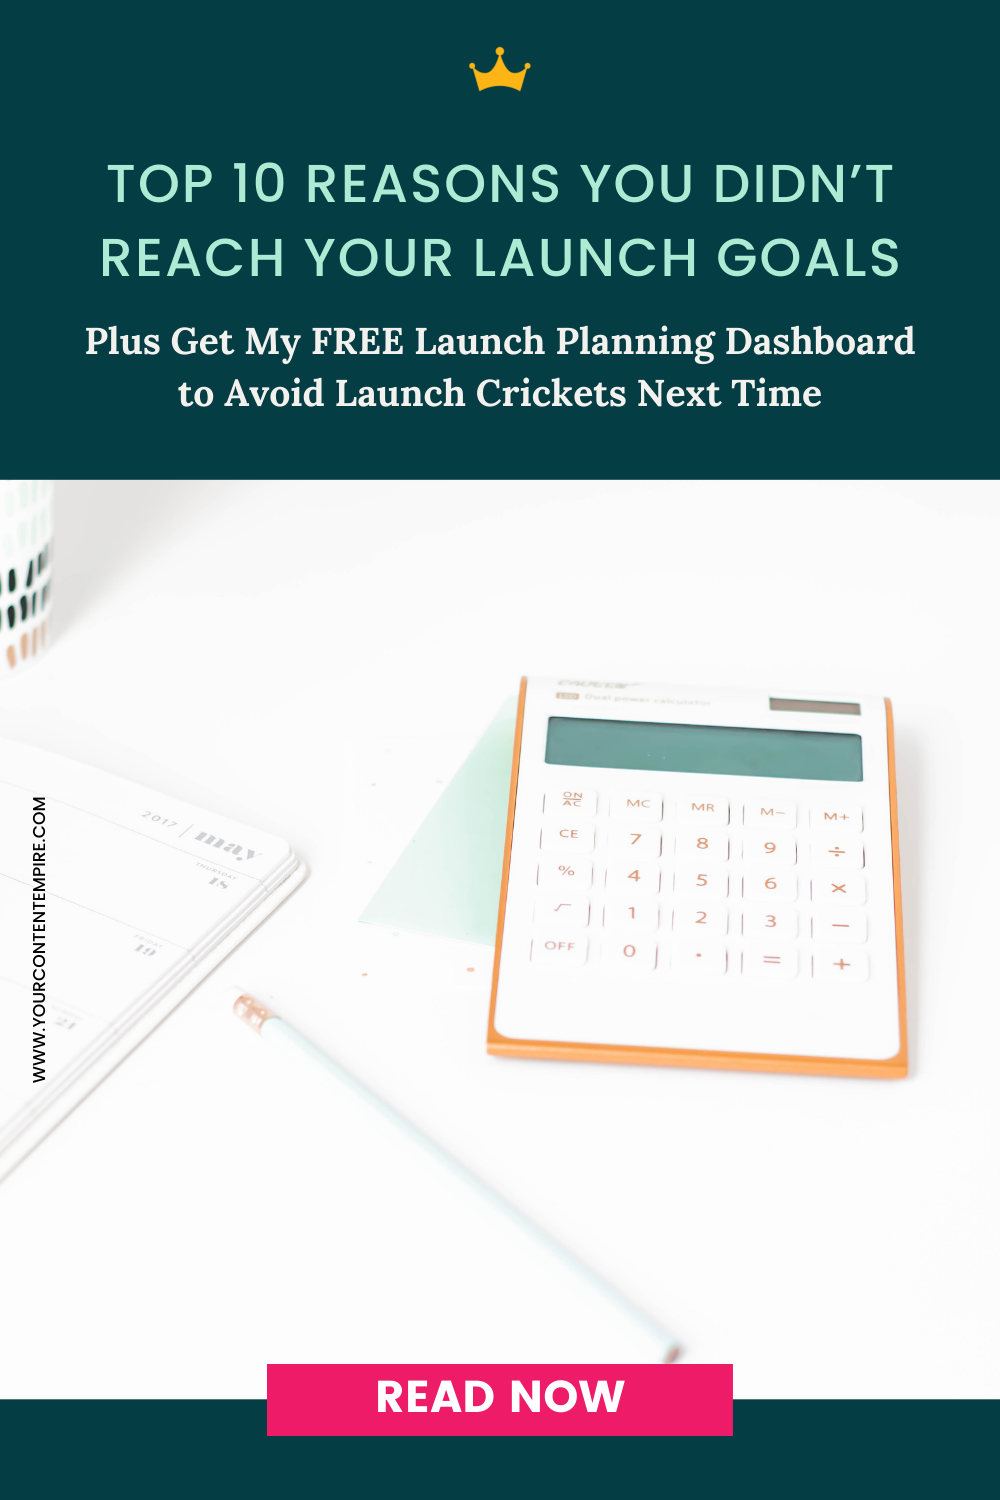 Top 10 Reasons You Didn’t Reach Your Launch Goals